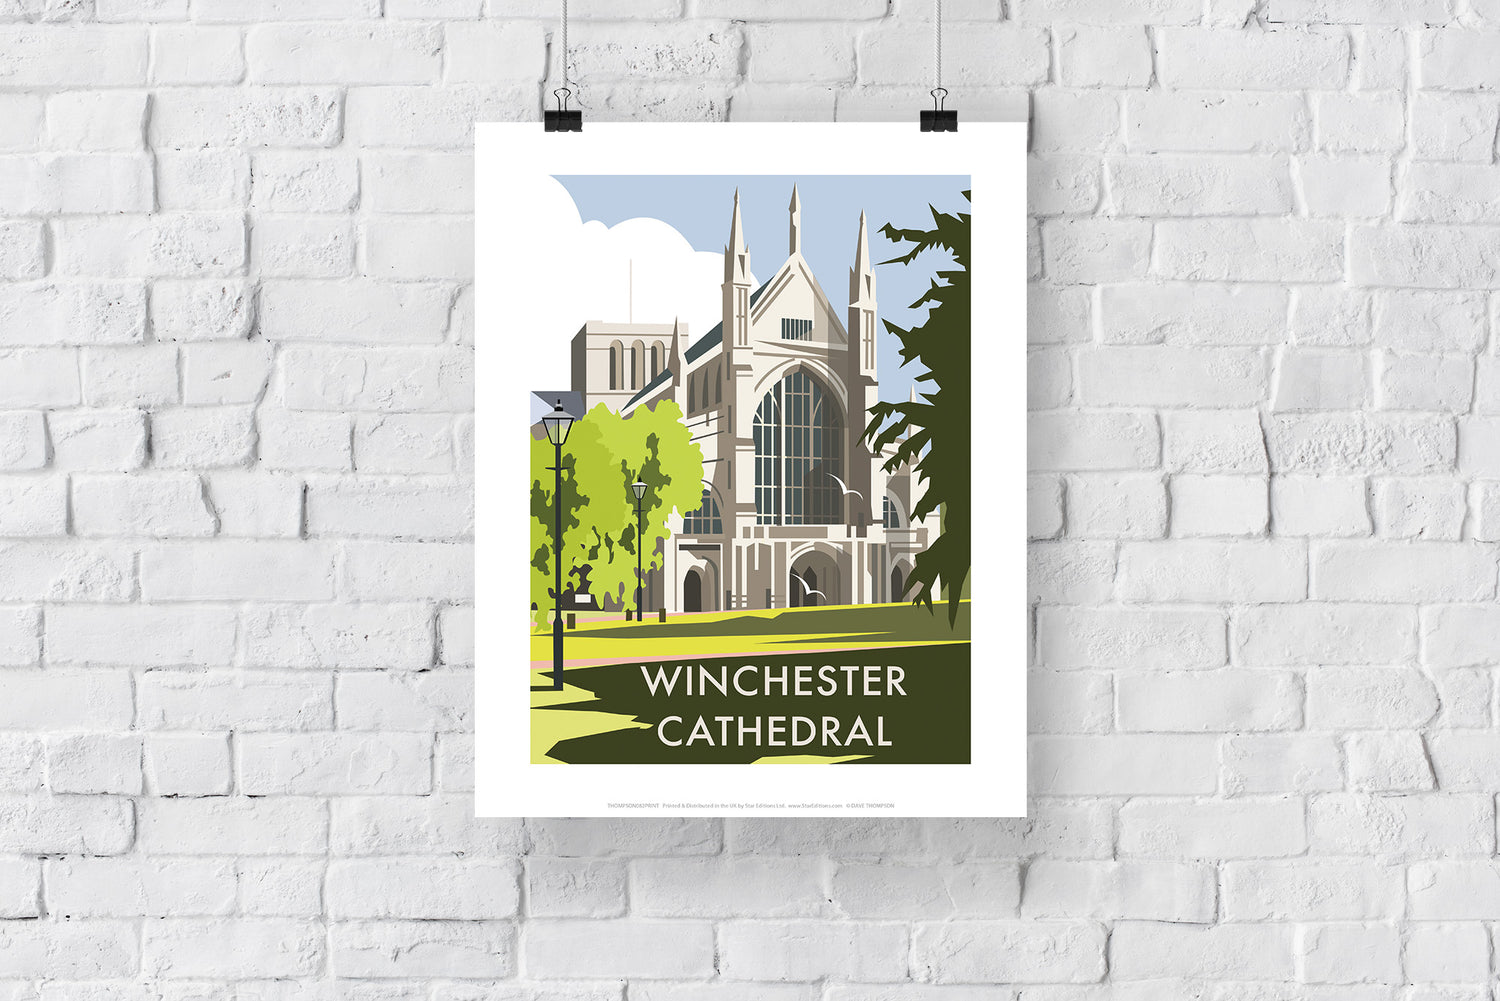 Winchester Cathedral - Art Print